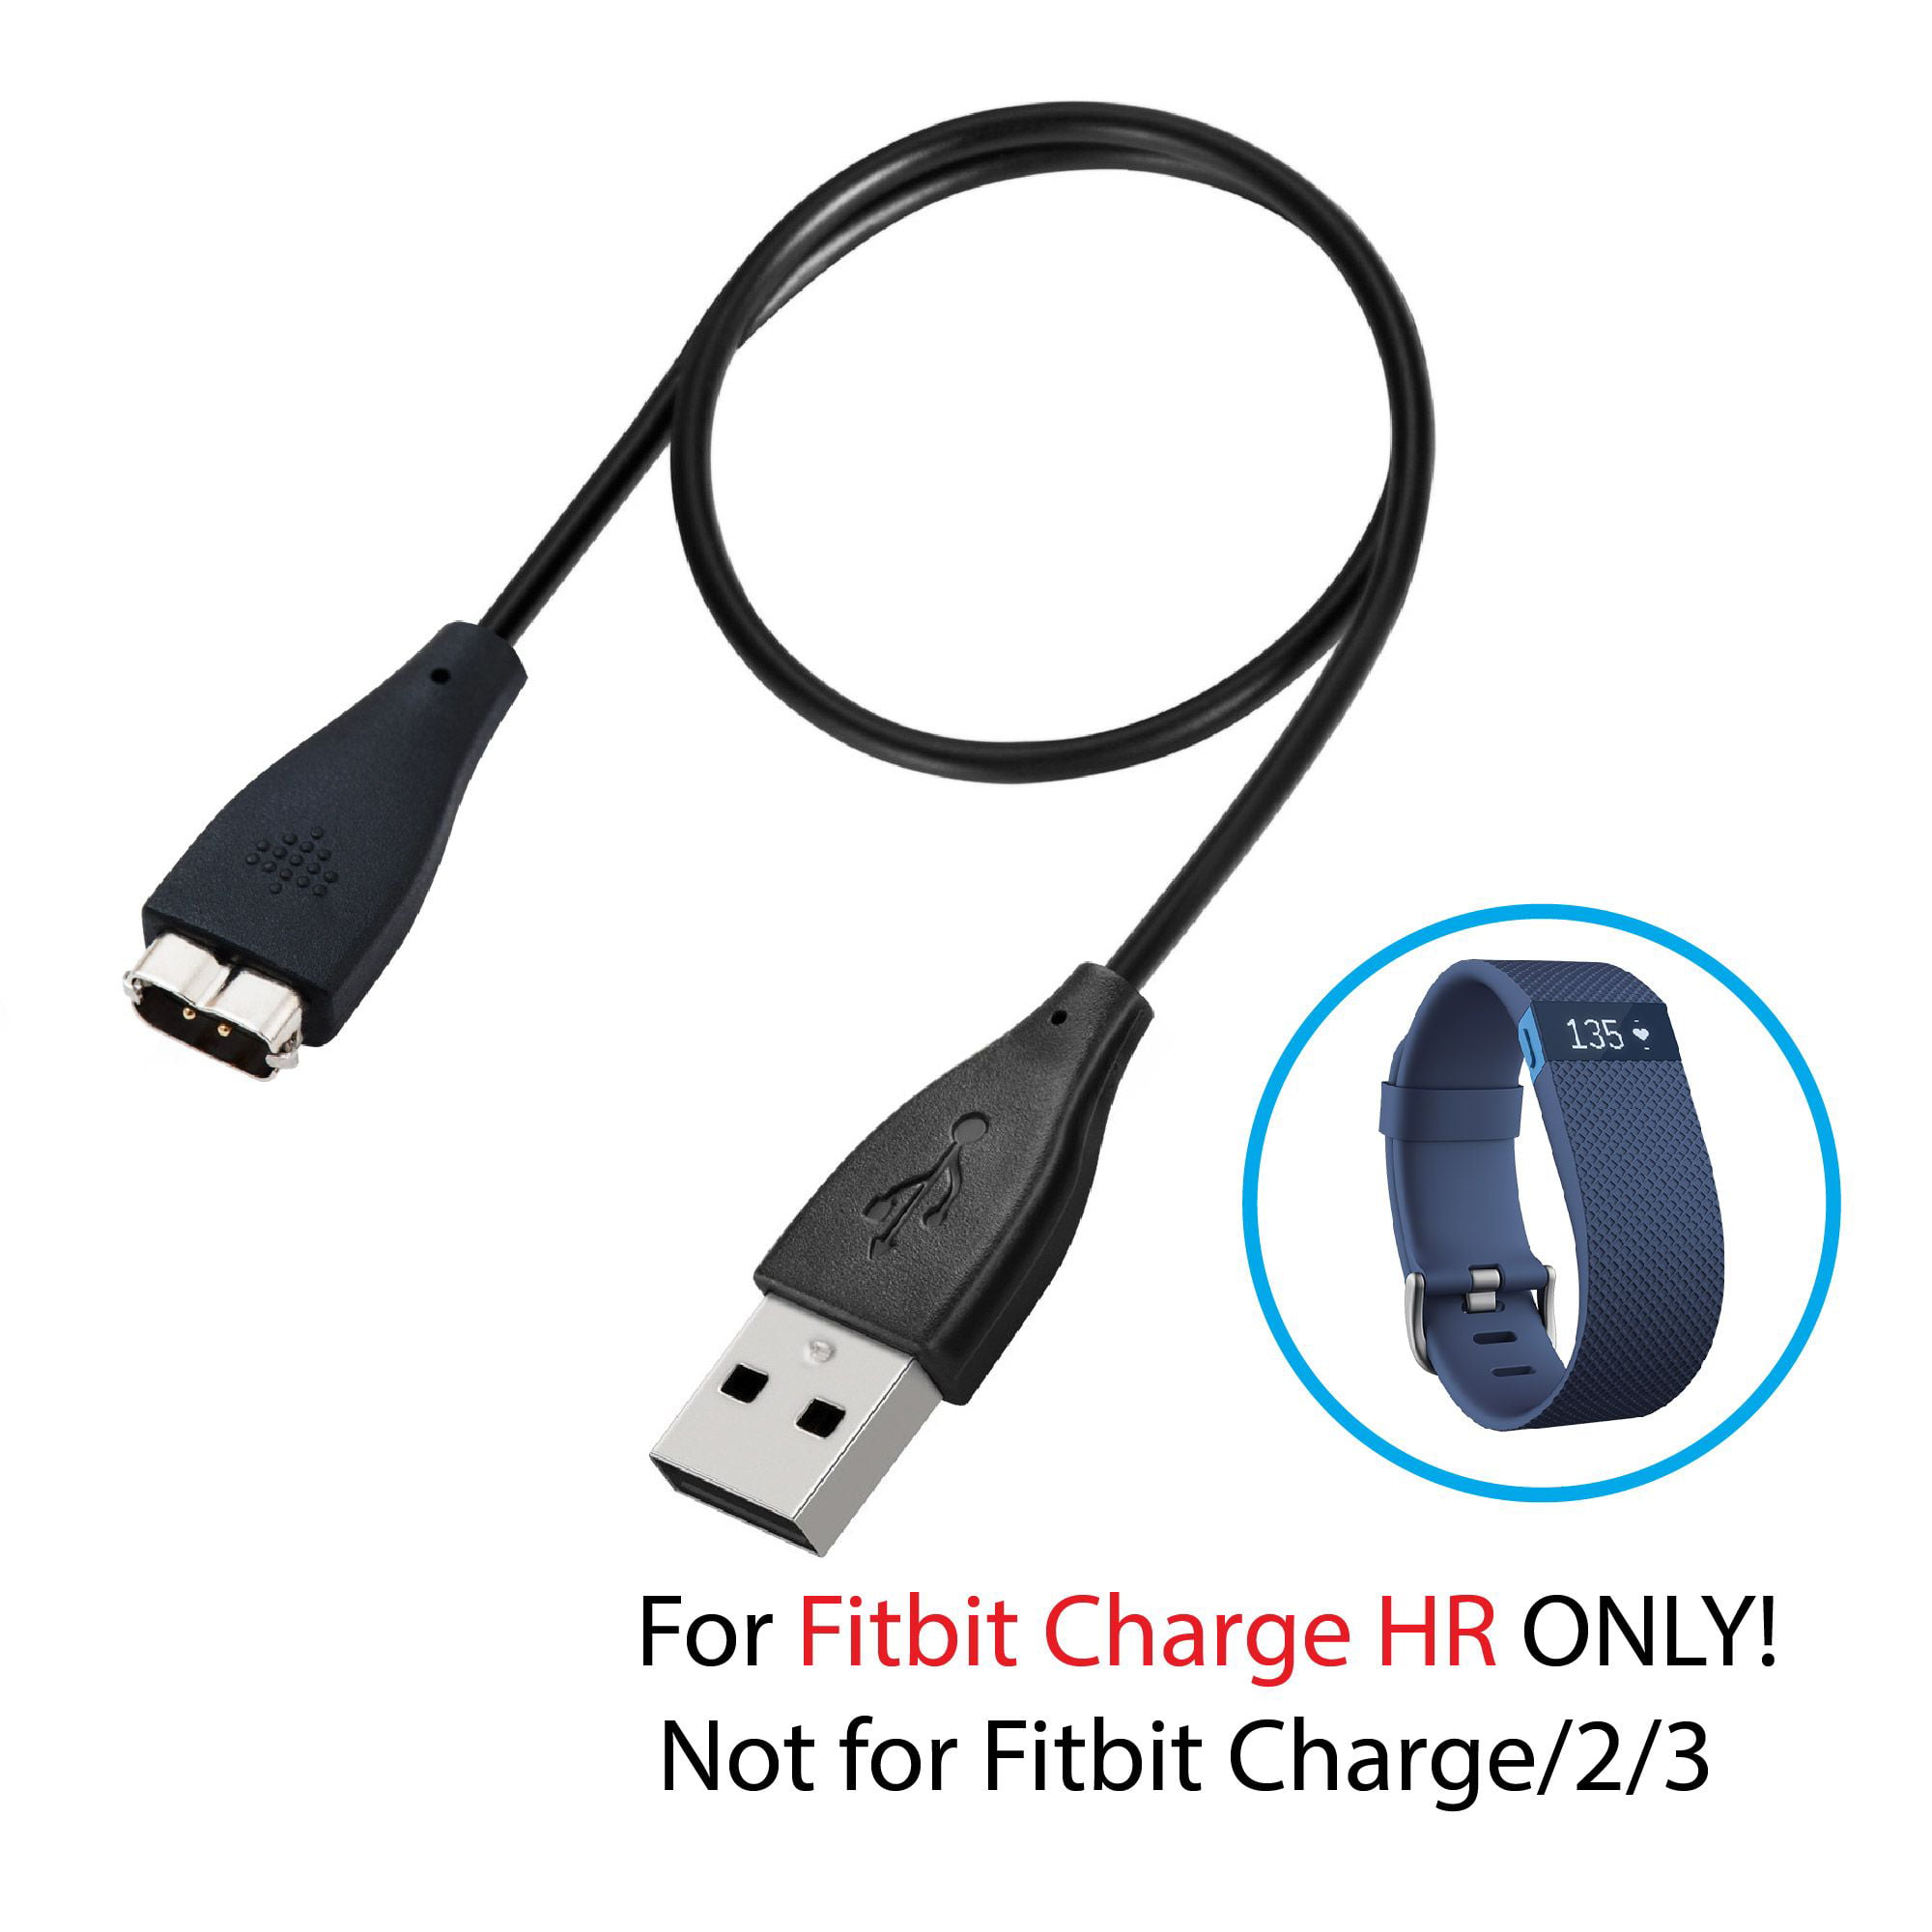 Replacement USB Charger Cable for Fitbit Charge HR Band Wireless Activity